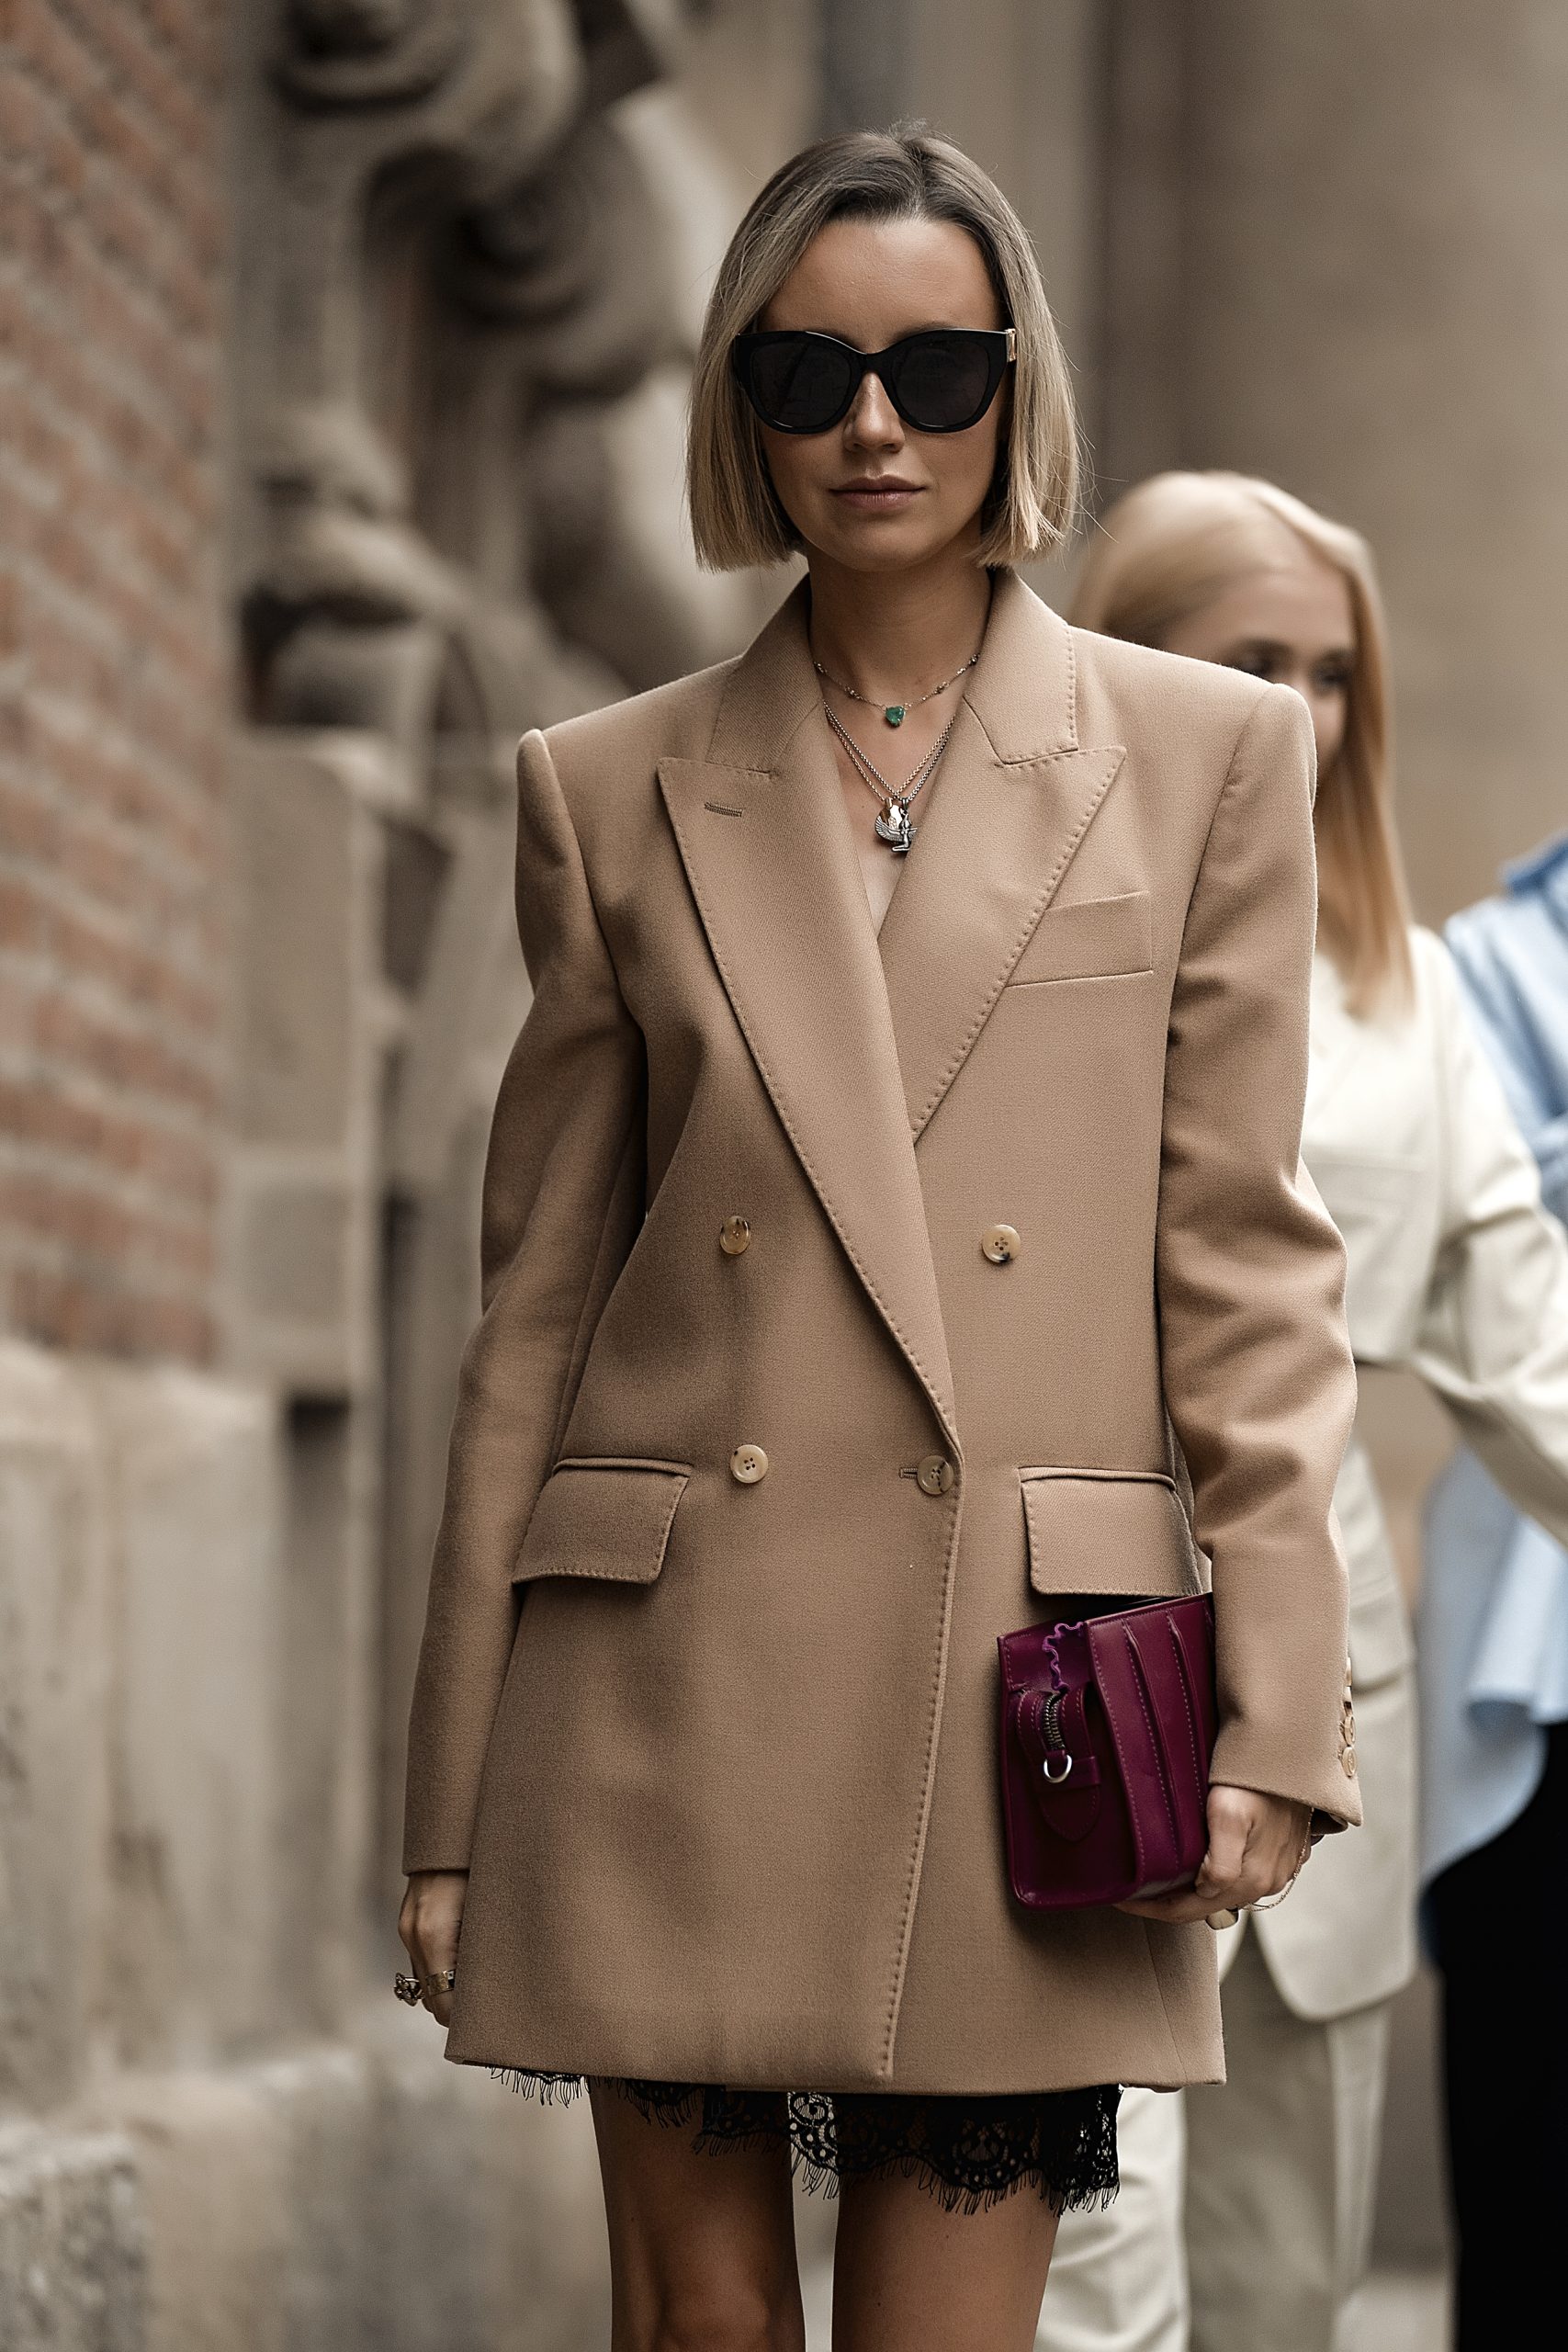 Vincenzo Grillo's Best Street Style Looks of Spring 2021 | The Impression